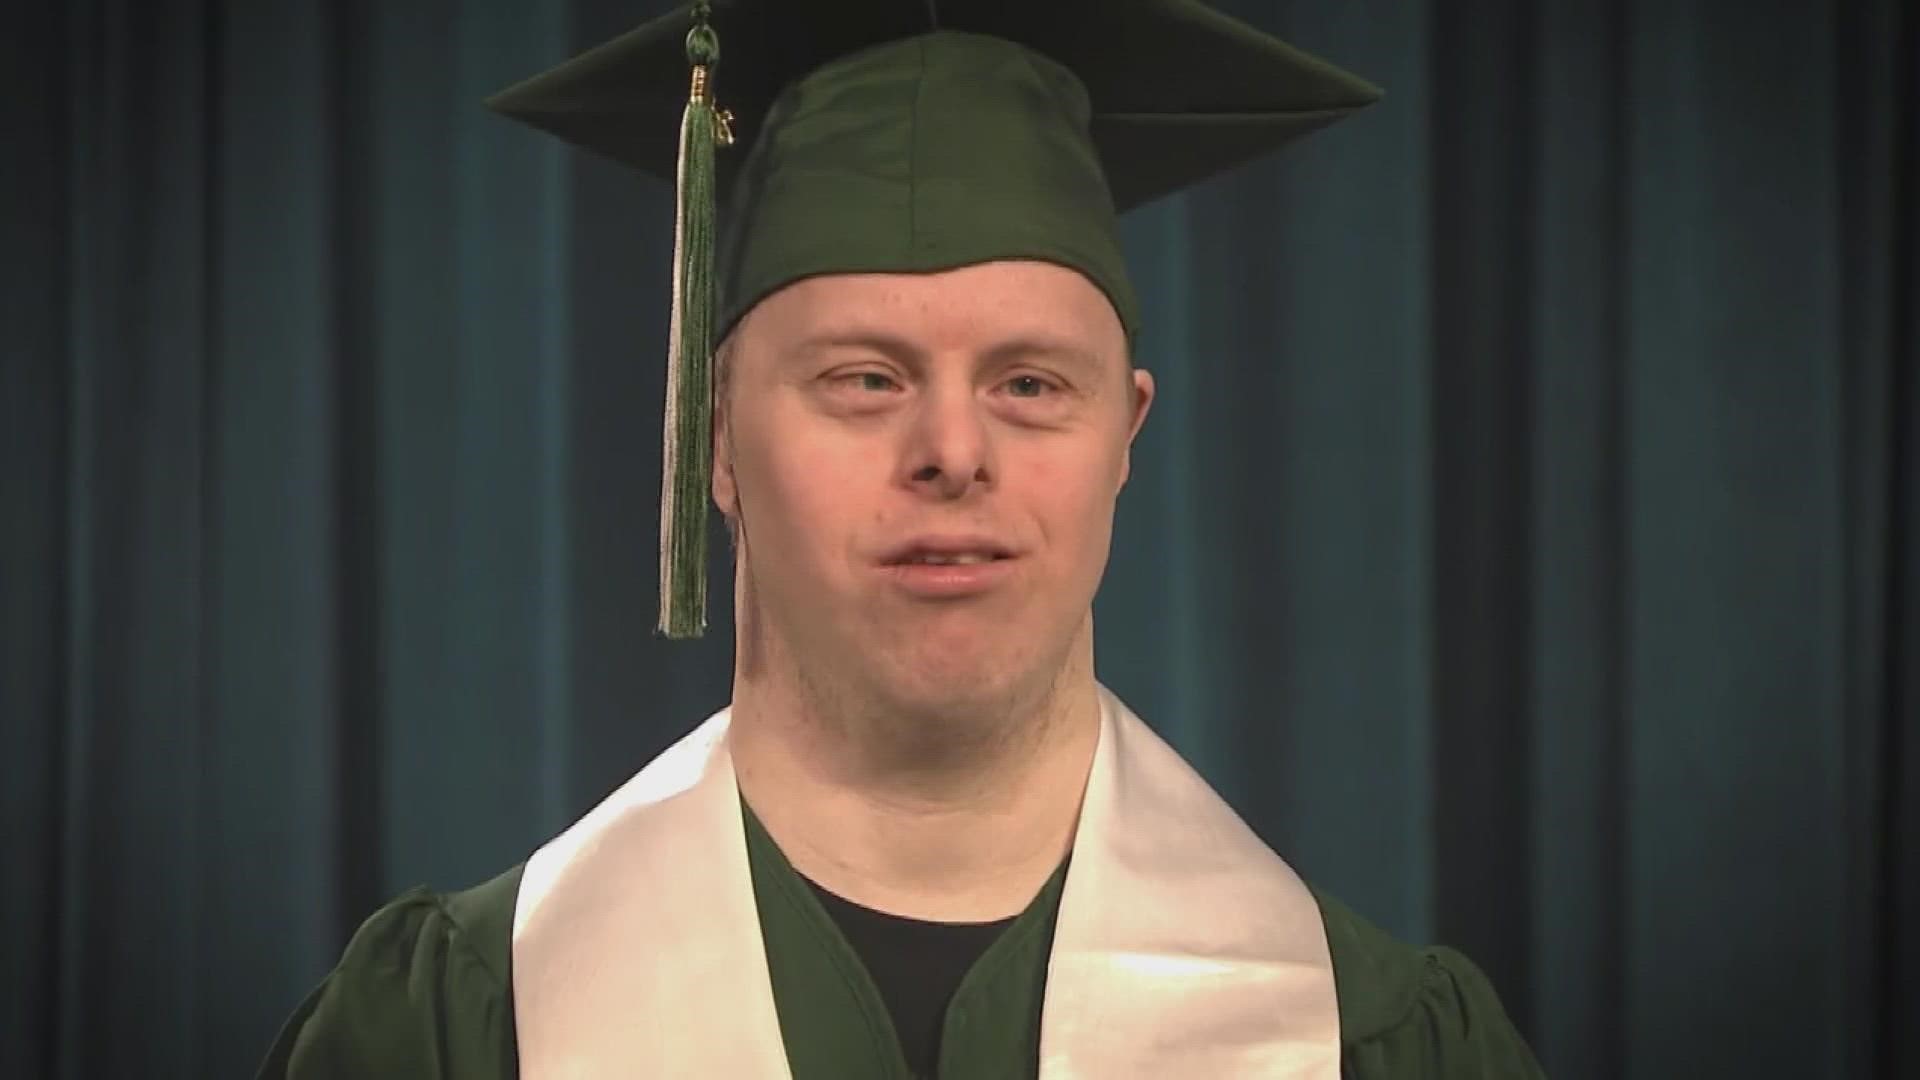 Dylan Kuehl became the first graduate of The Evergreen State College to be living with Down syndrome.